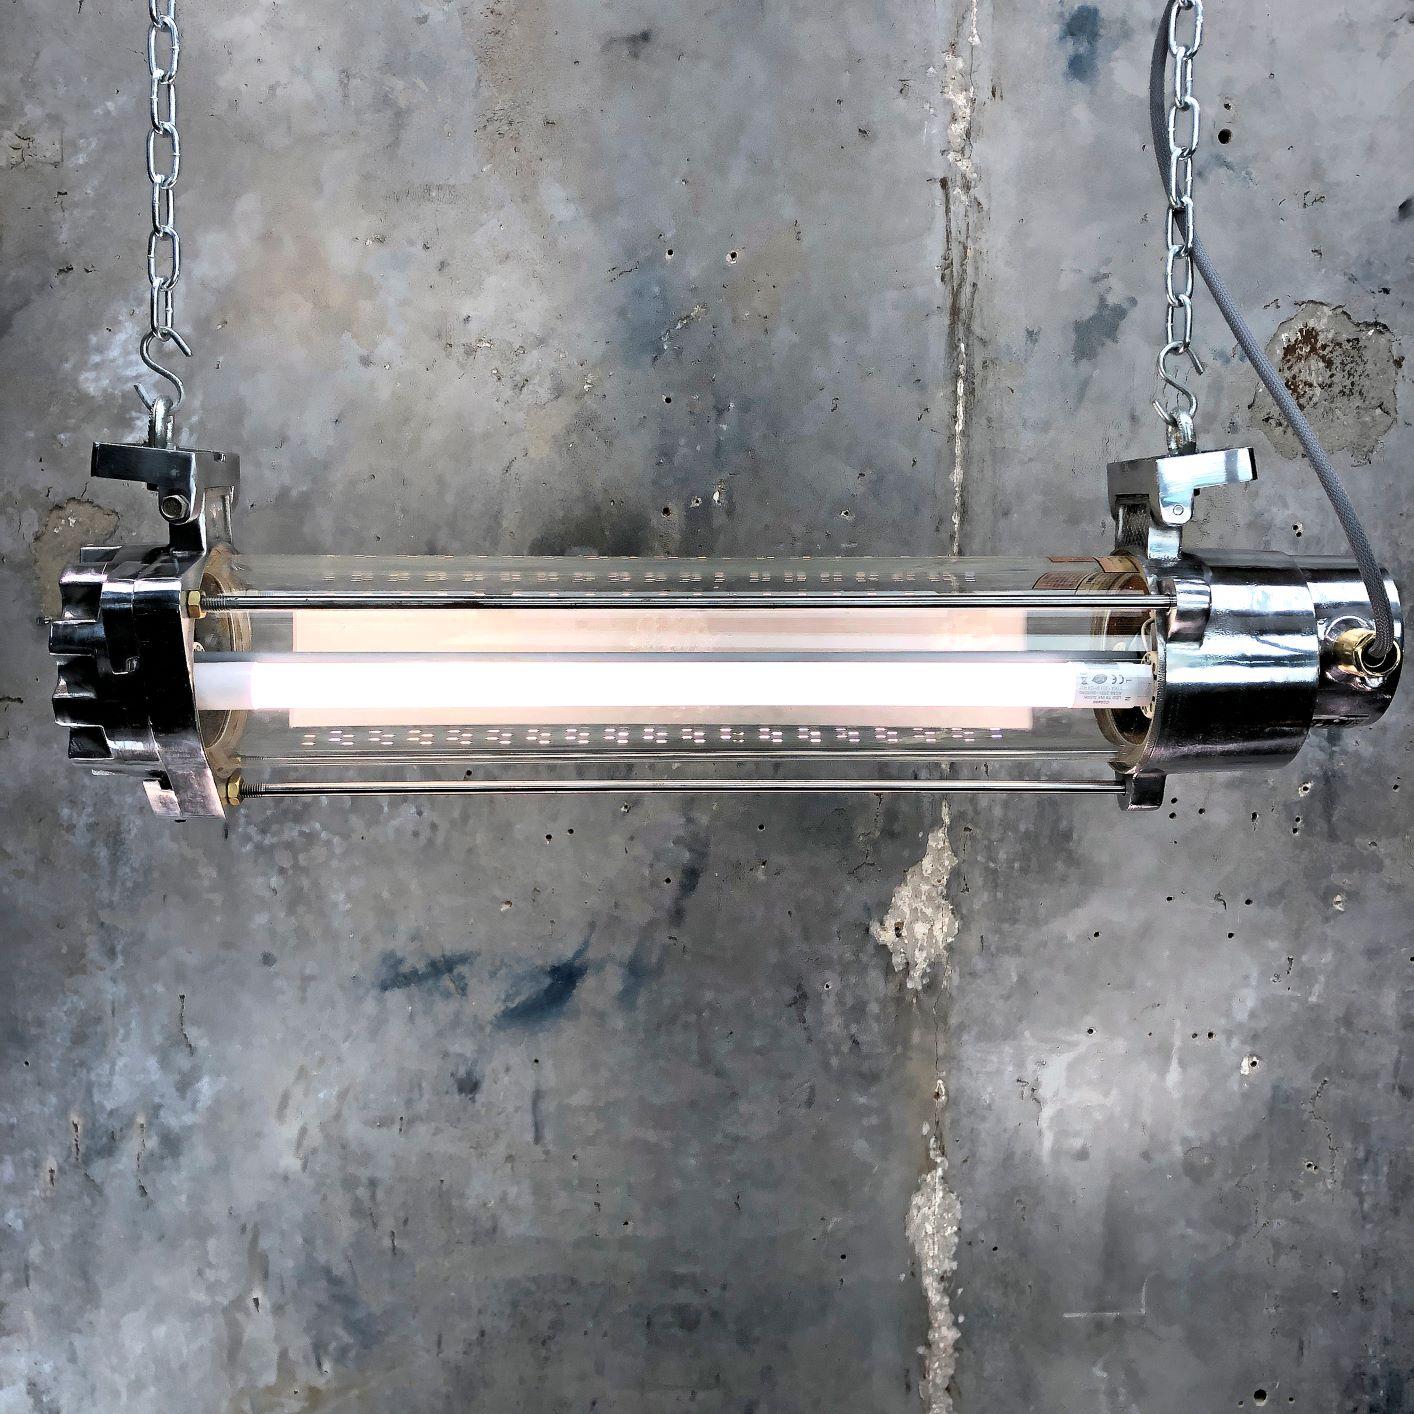 A retro Industrial aluminum German explosion proof ceiling striplight by Leuchtenbau Wittenberg. Reclaimed from supertankers and military vessels, then professionally stripped and refinished in the UK by Loomlight ready for modern interiors.

This